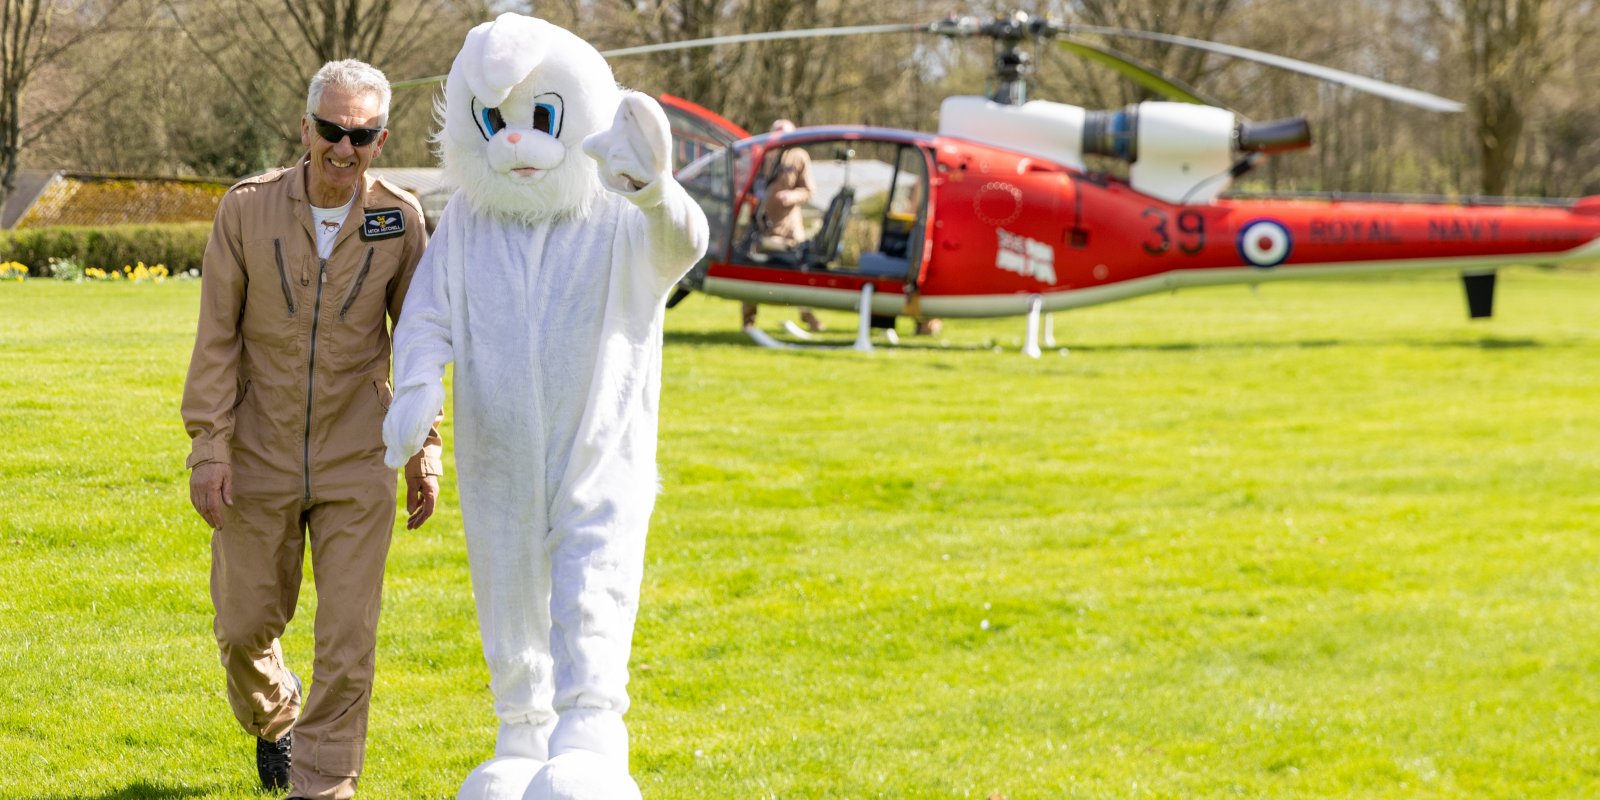 Easter bunny and pilot walking across green field with helicopter in background